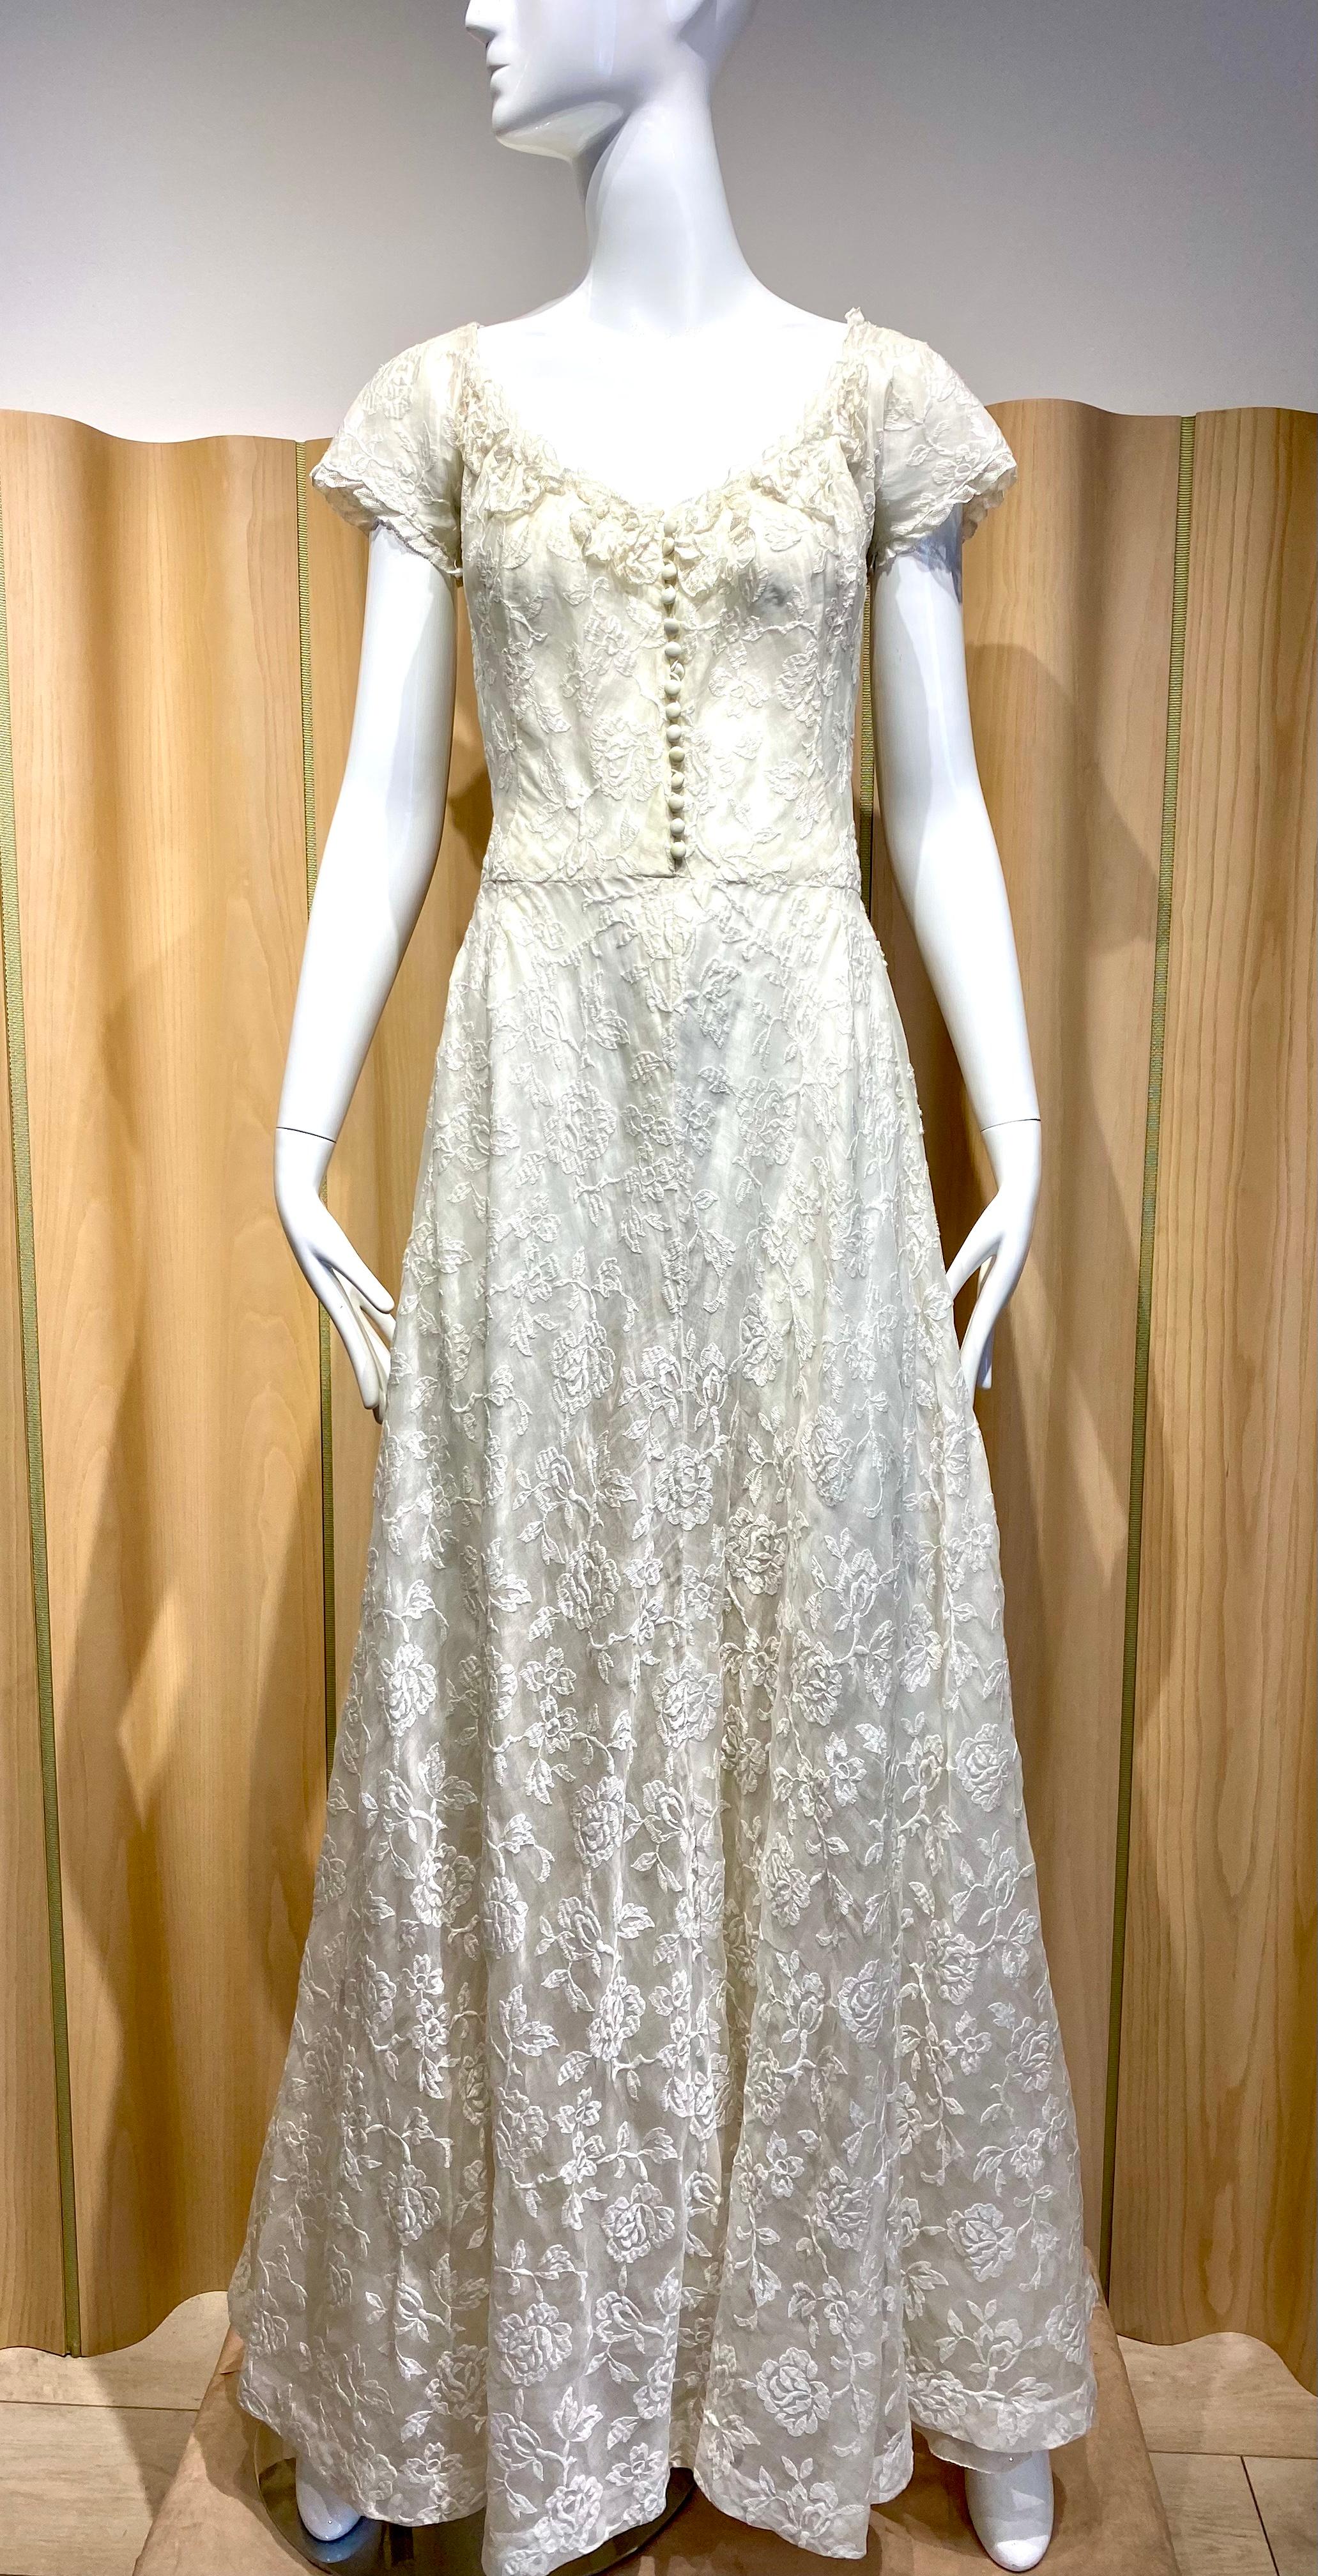 1930s White Cotton Embroidered Dress with Lace For Sale 2